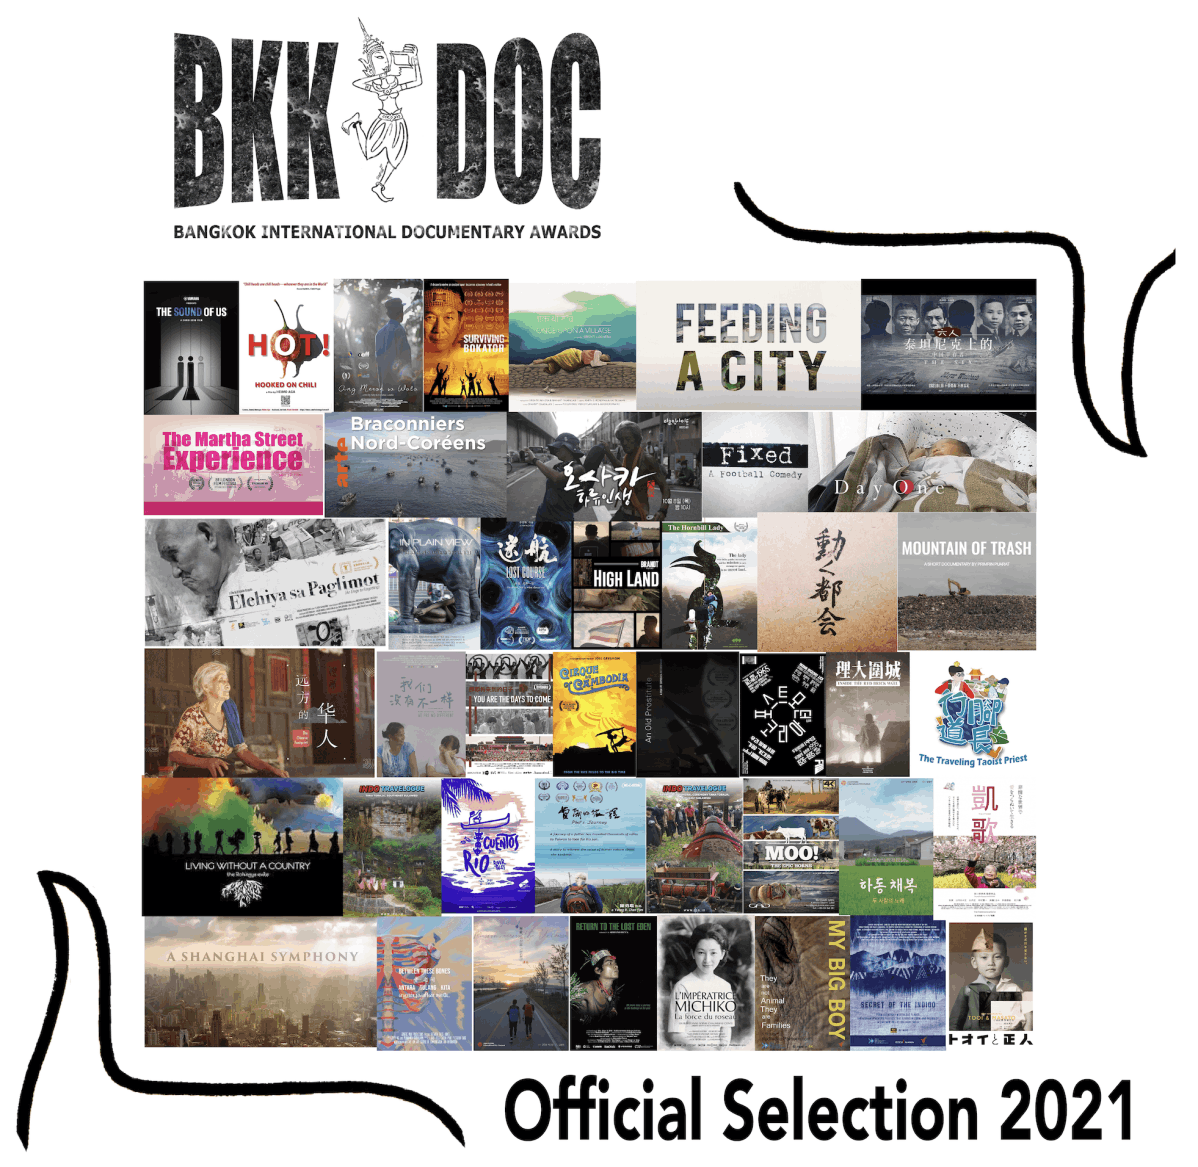 BKKDOC all official selection 2021